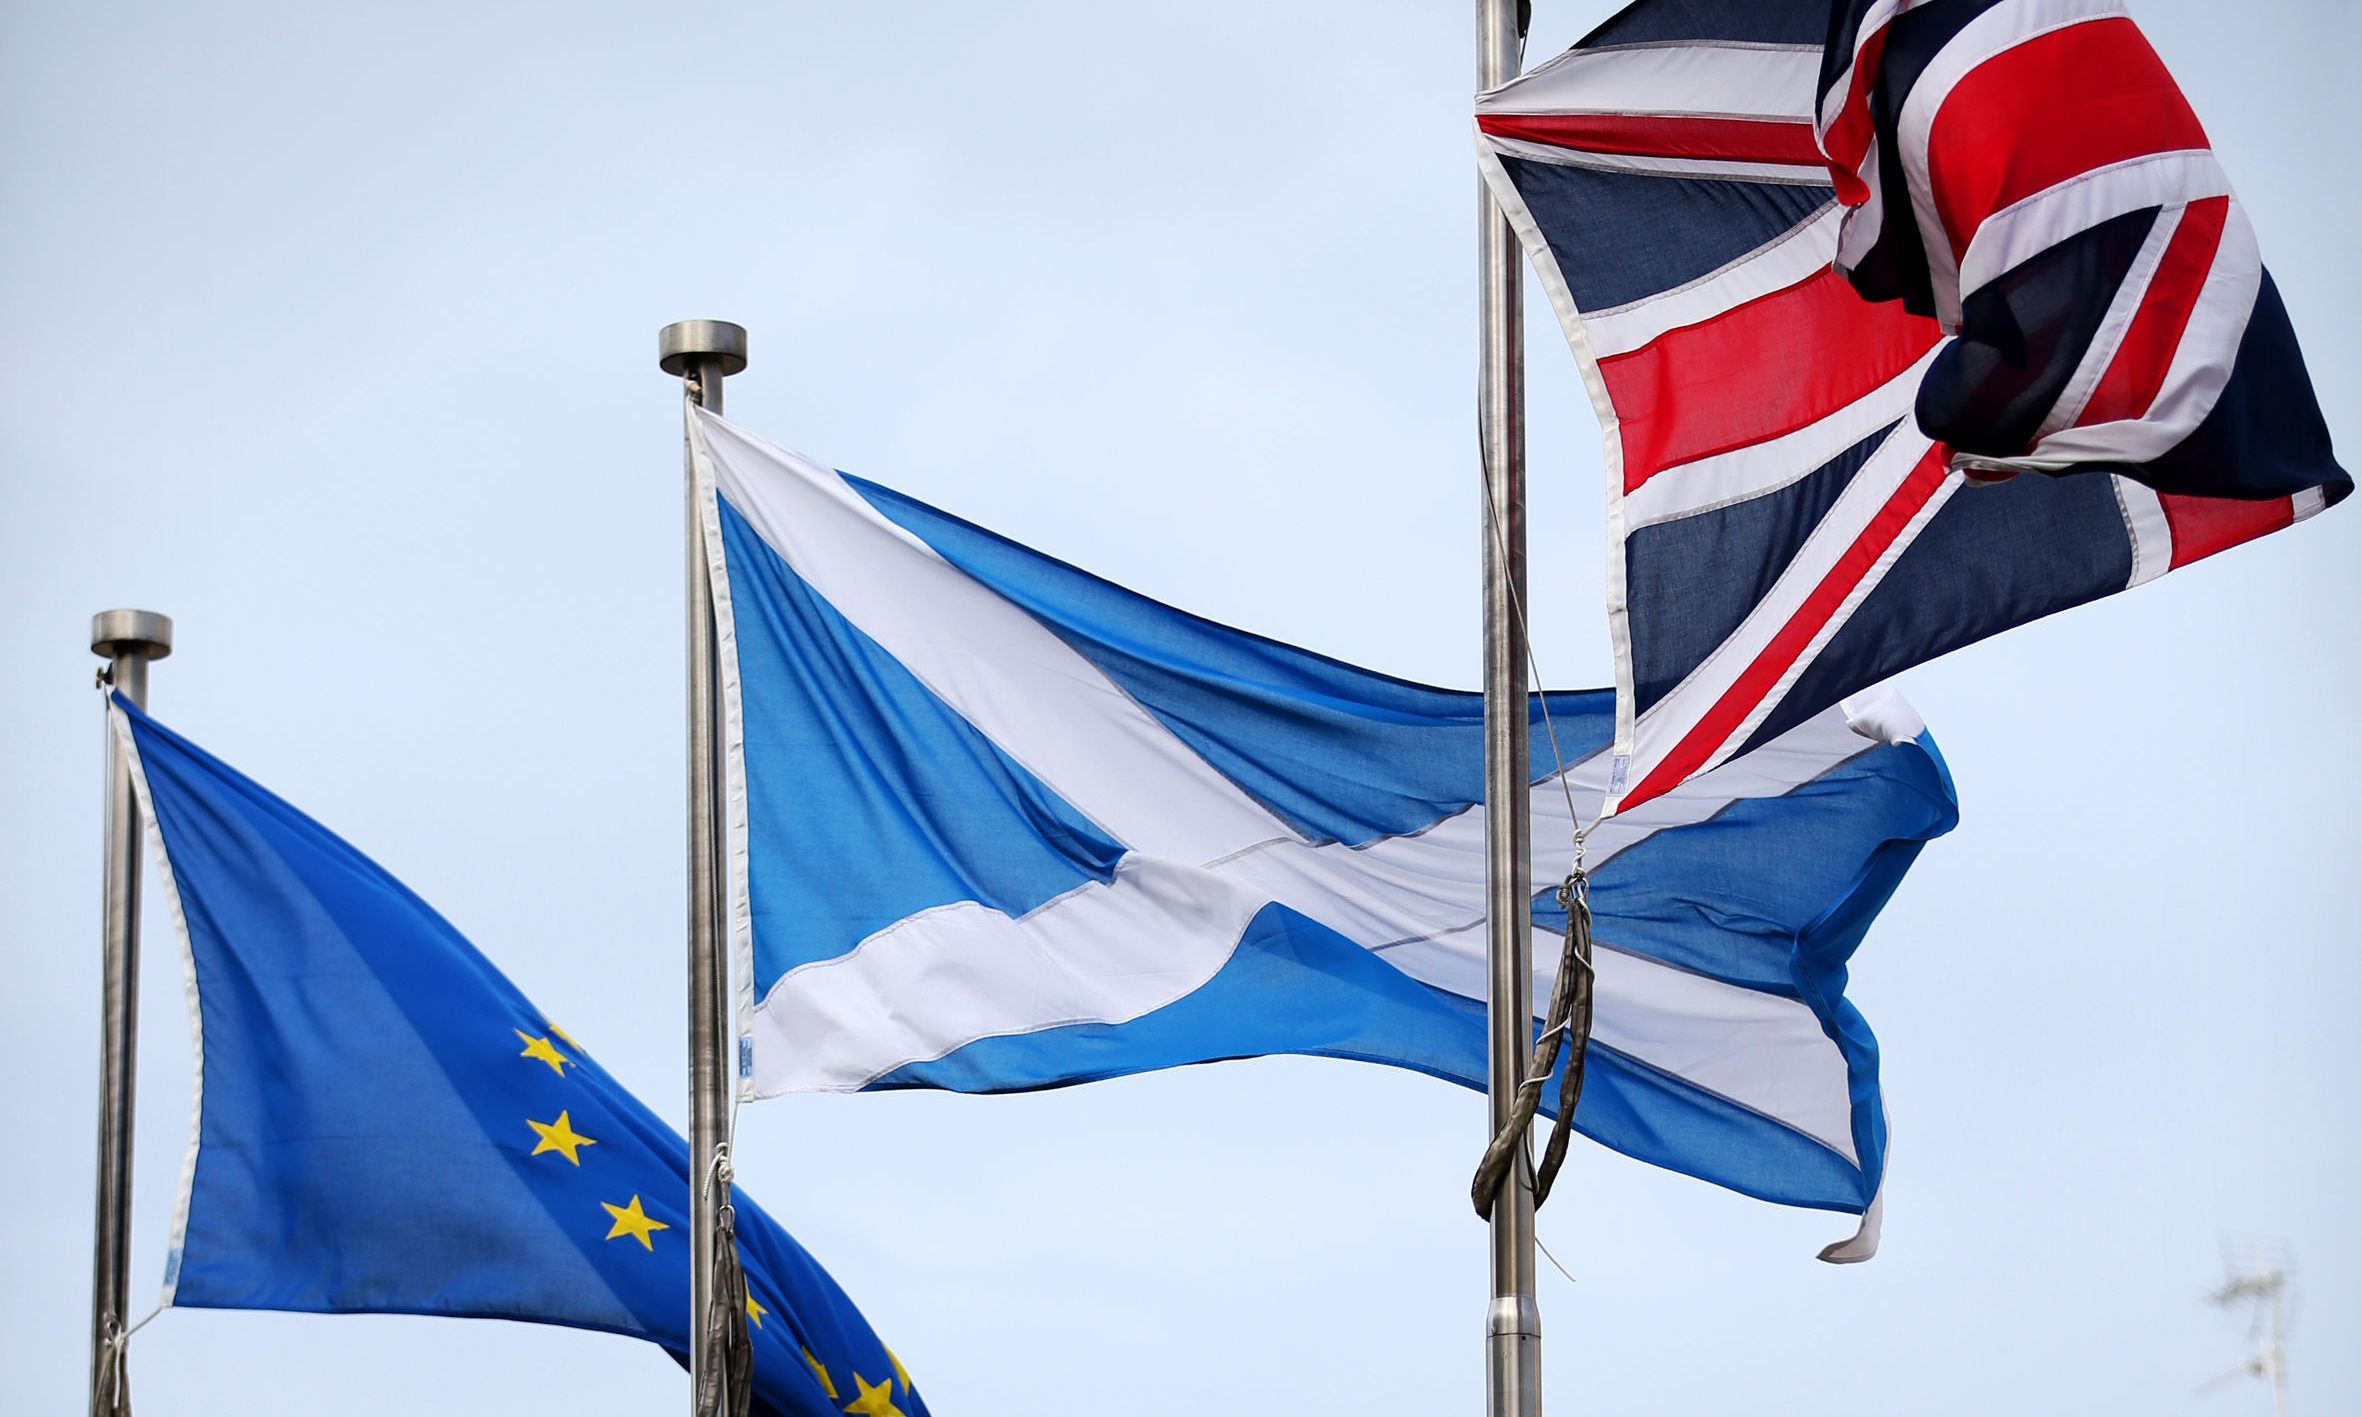 Key figures in the European Parliament are "very sympathetic" to an independent Scotland rejoining the EU, says David Martin MEP.